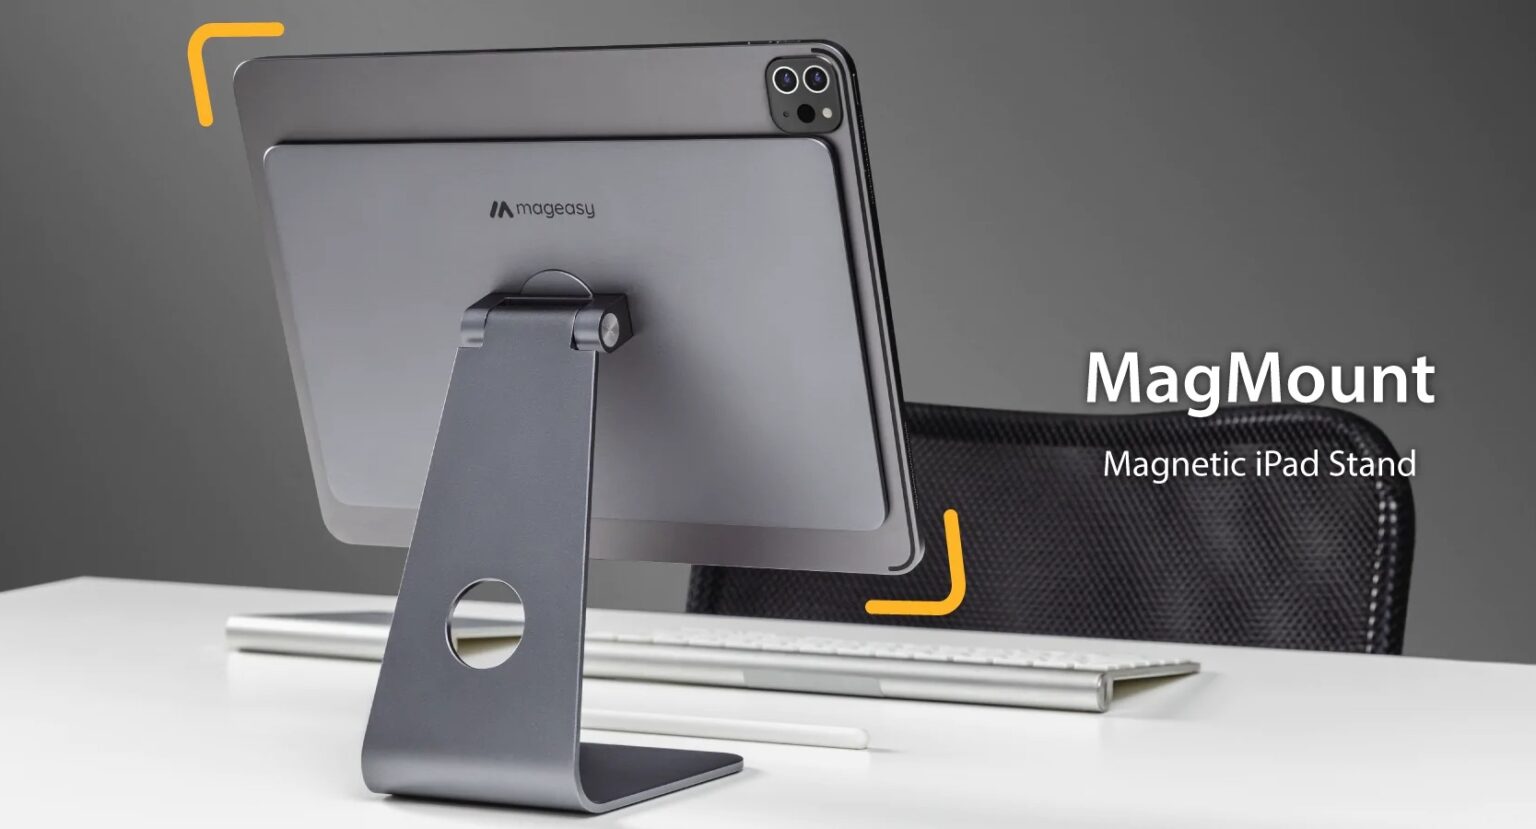 This magnetic stand helps turn your iPad into a desktop computer.